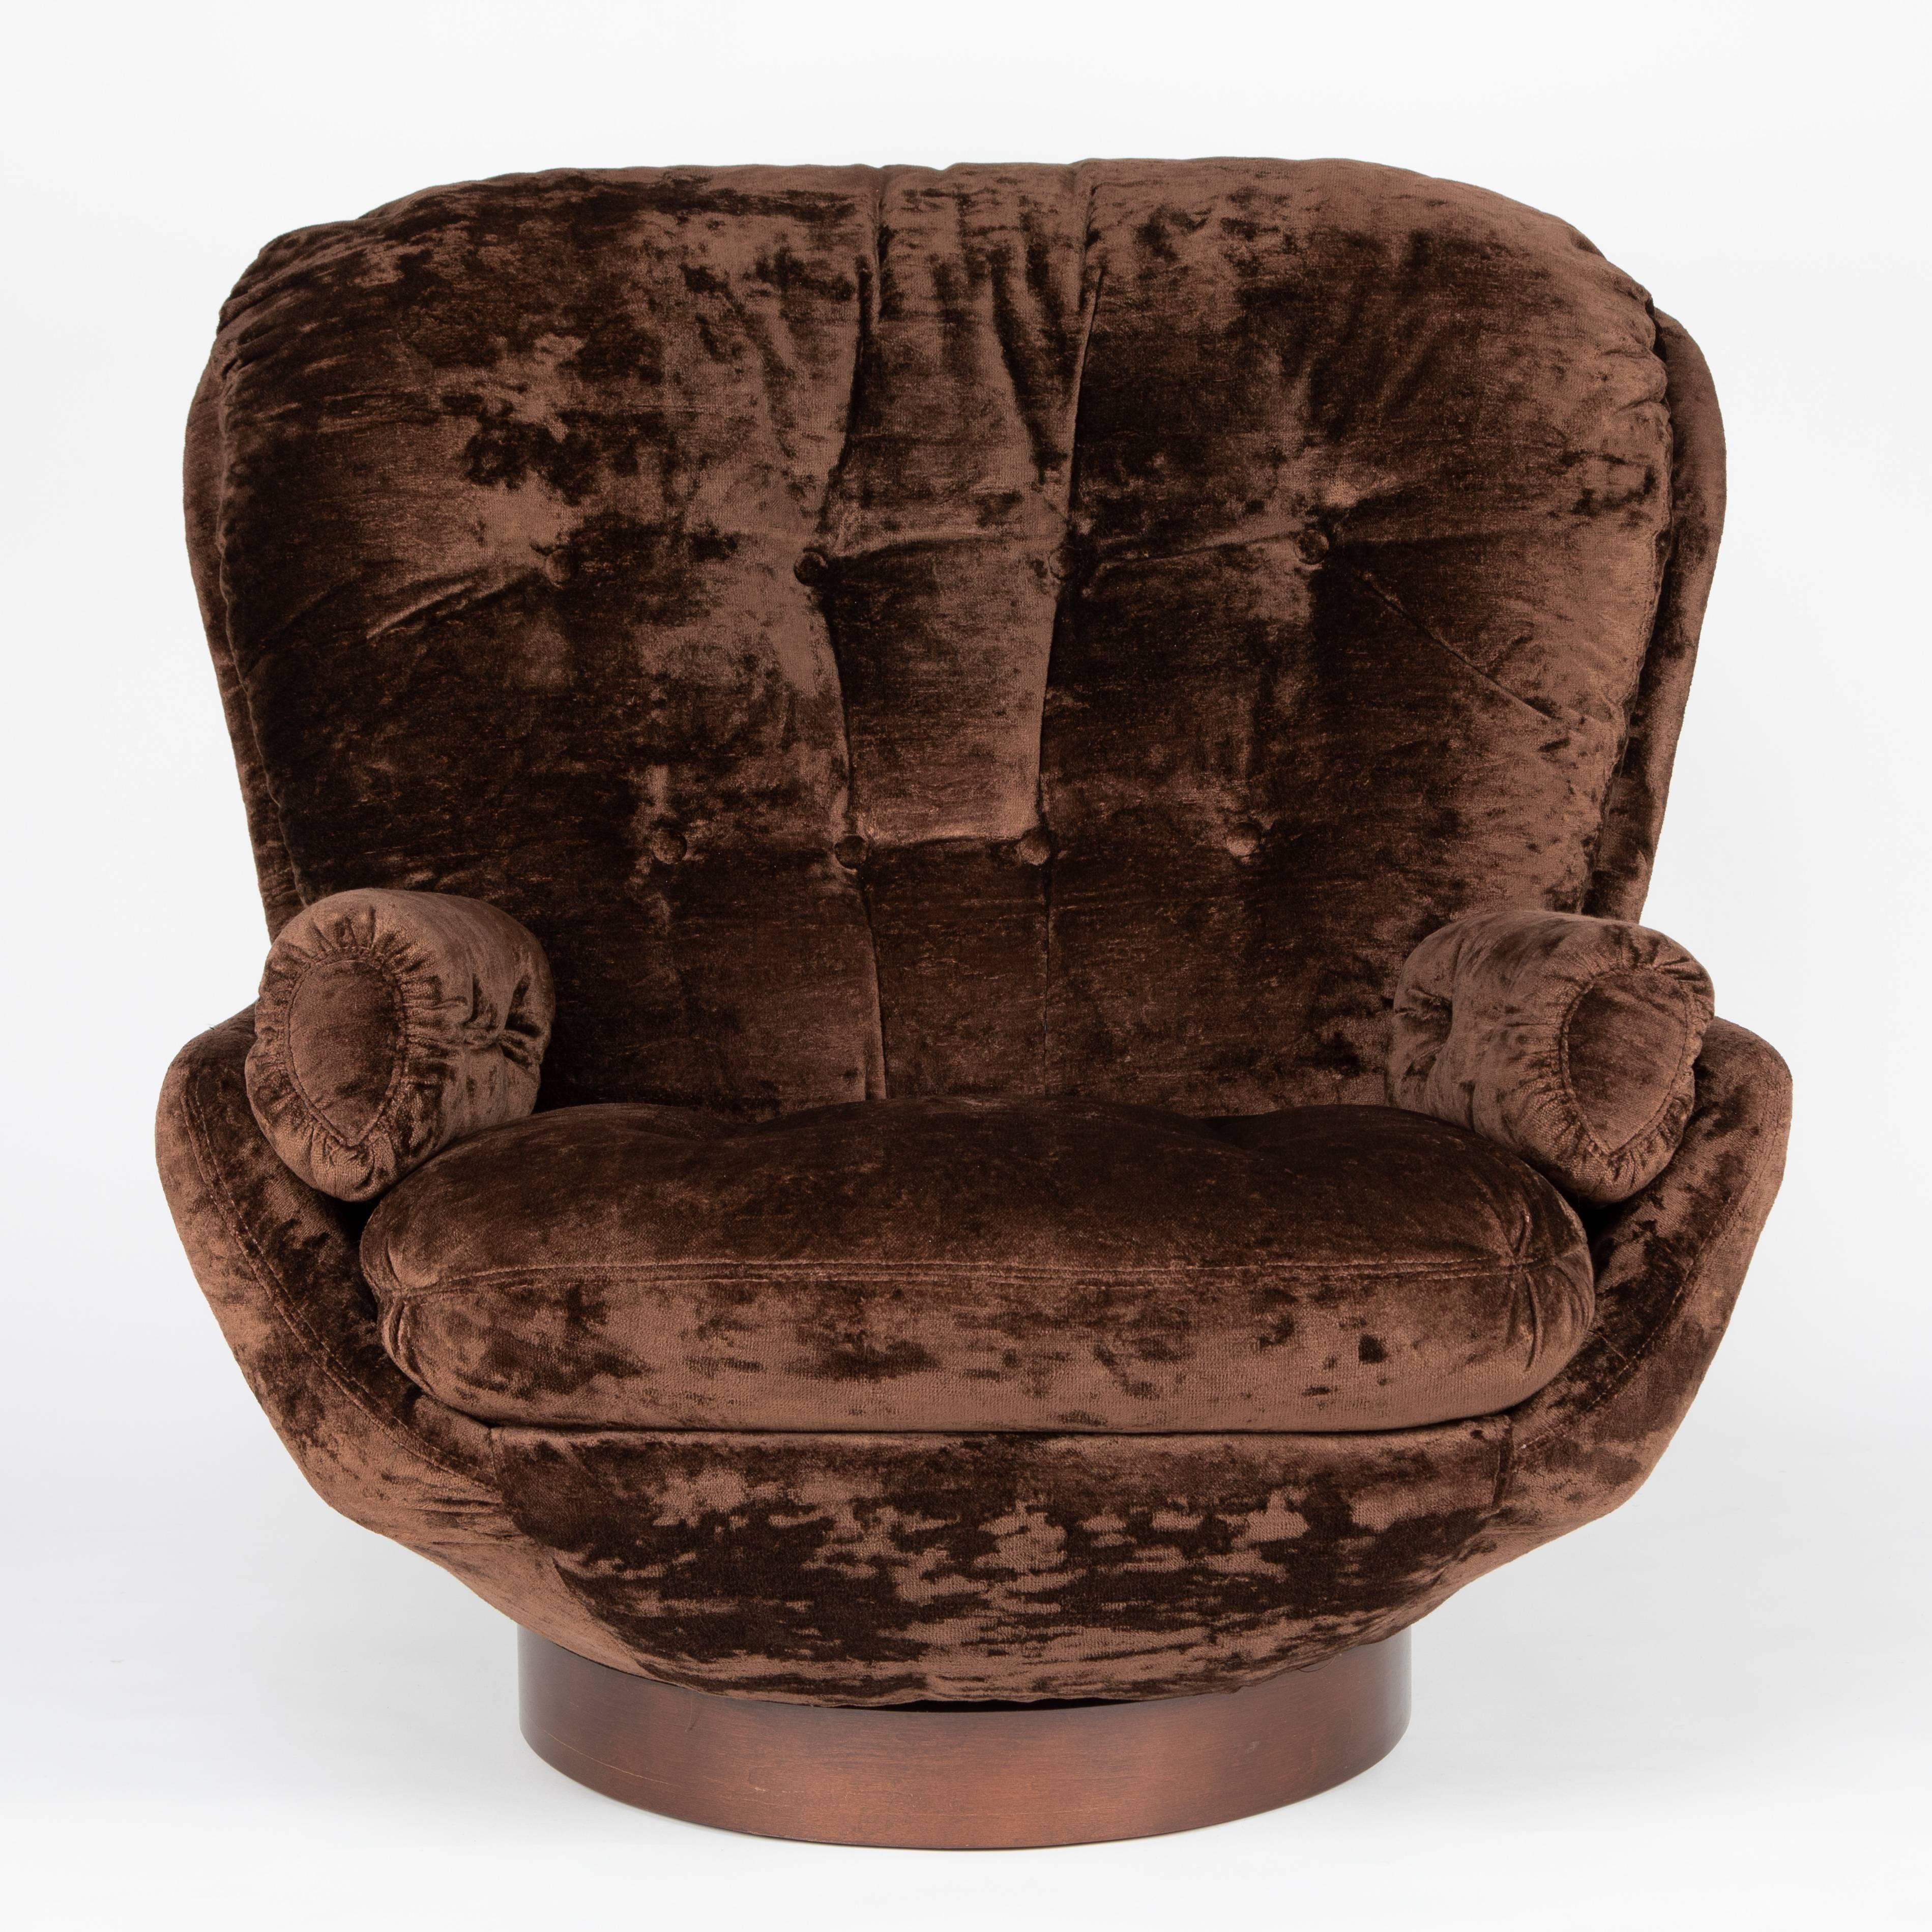 Large and curvaceous lounge chair and ottoman in original chocolate-brown crushed velvet. The back cushion is fixed; the loose seat cushion is flanked by fixed arm cushions; all are button-tufted. The chair and ottoman rest on walnut-wrapped,